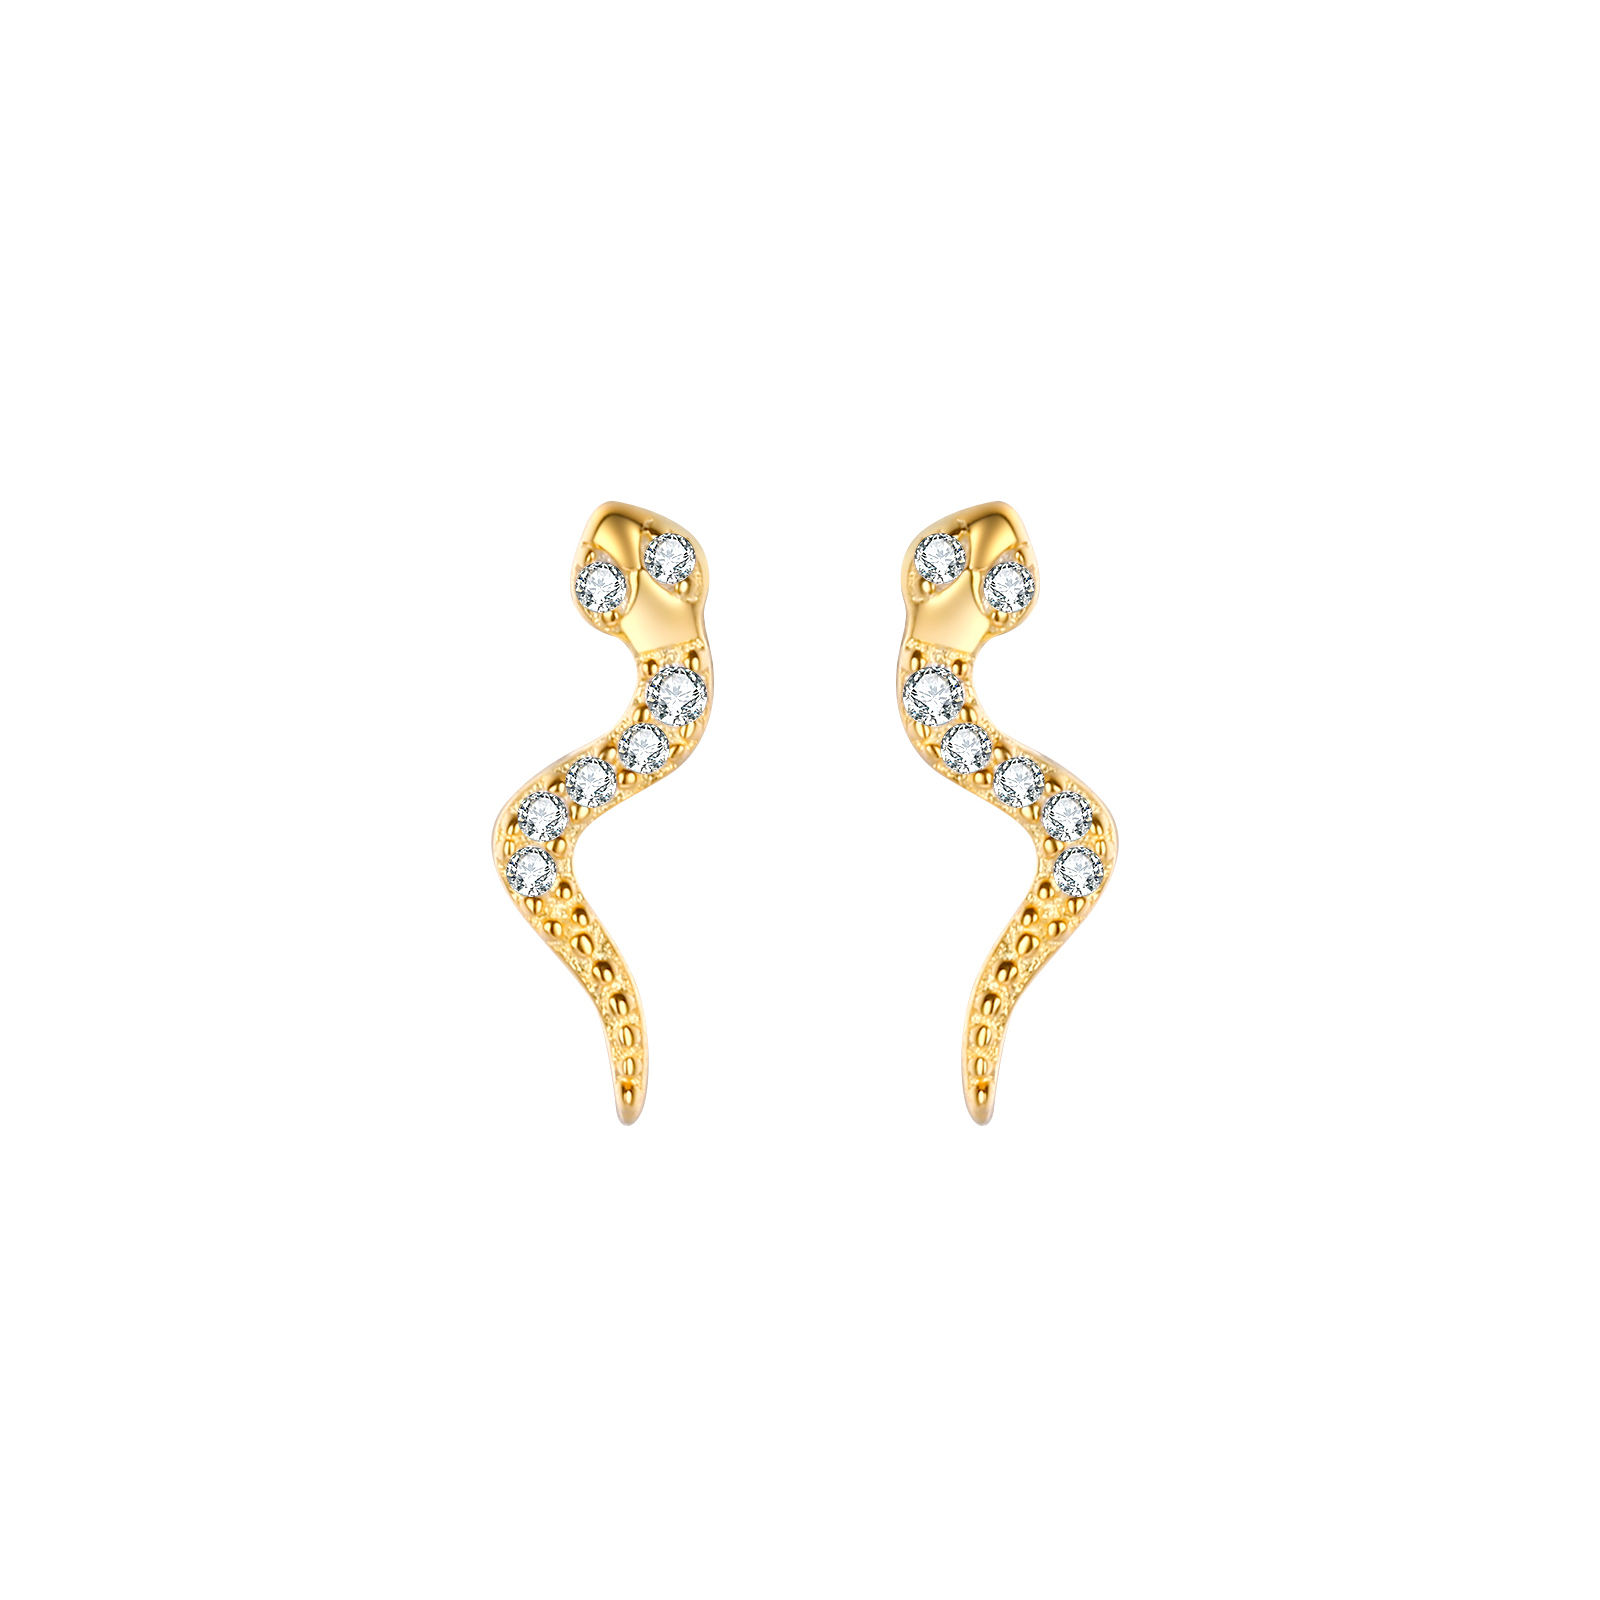 Silver Zircon Earrings Snake Earrings - Zirconia - 10mm - Silver Gold Plated and Rhodium Silver